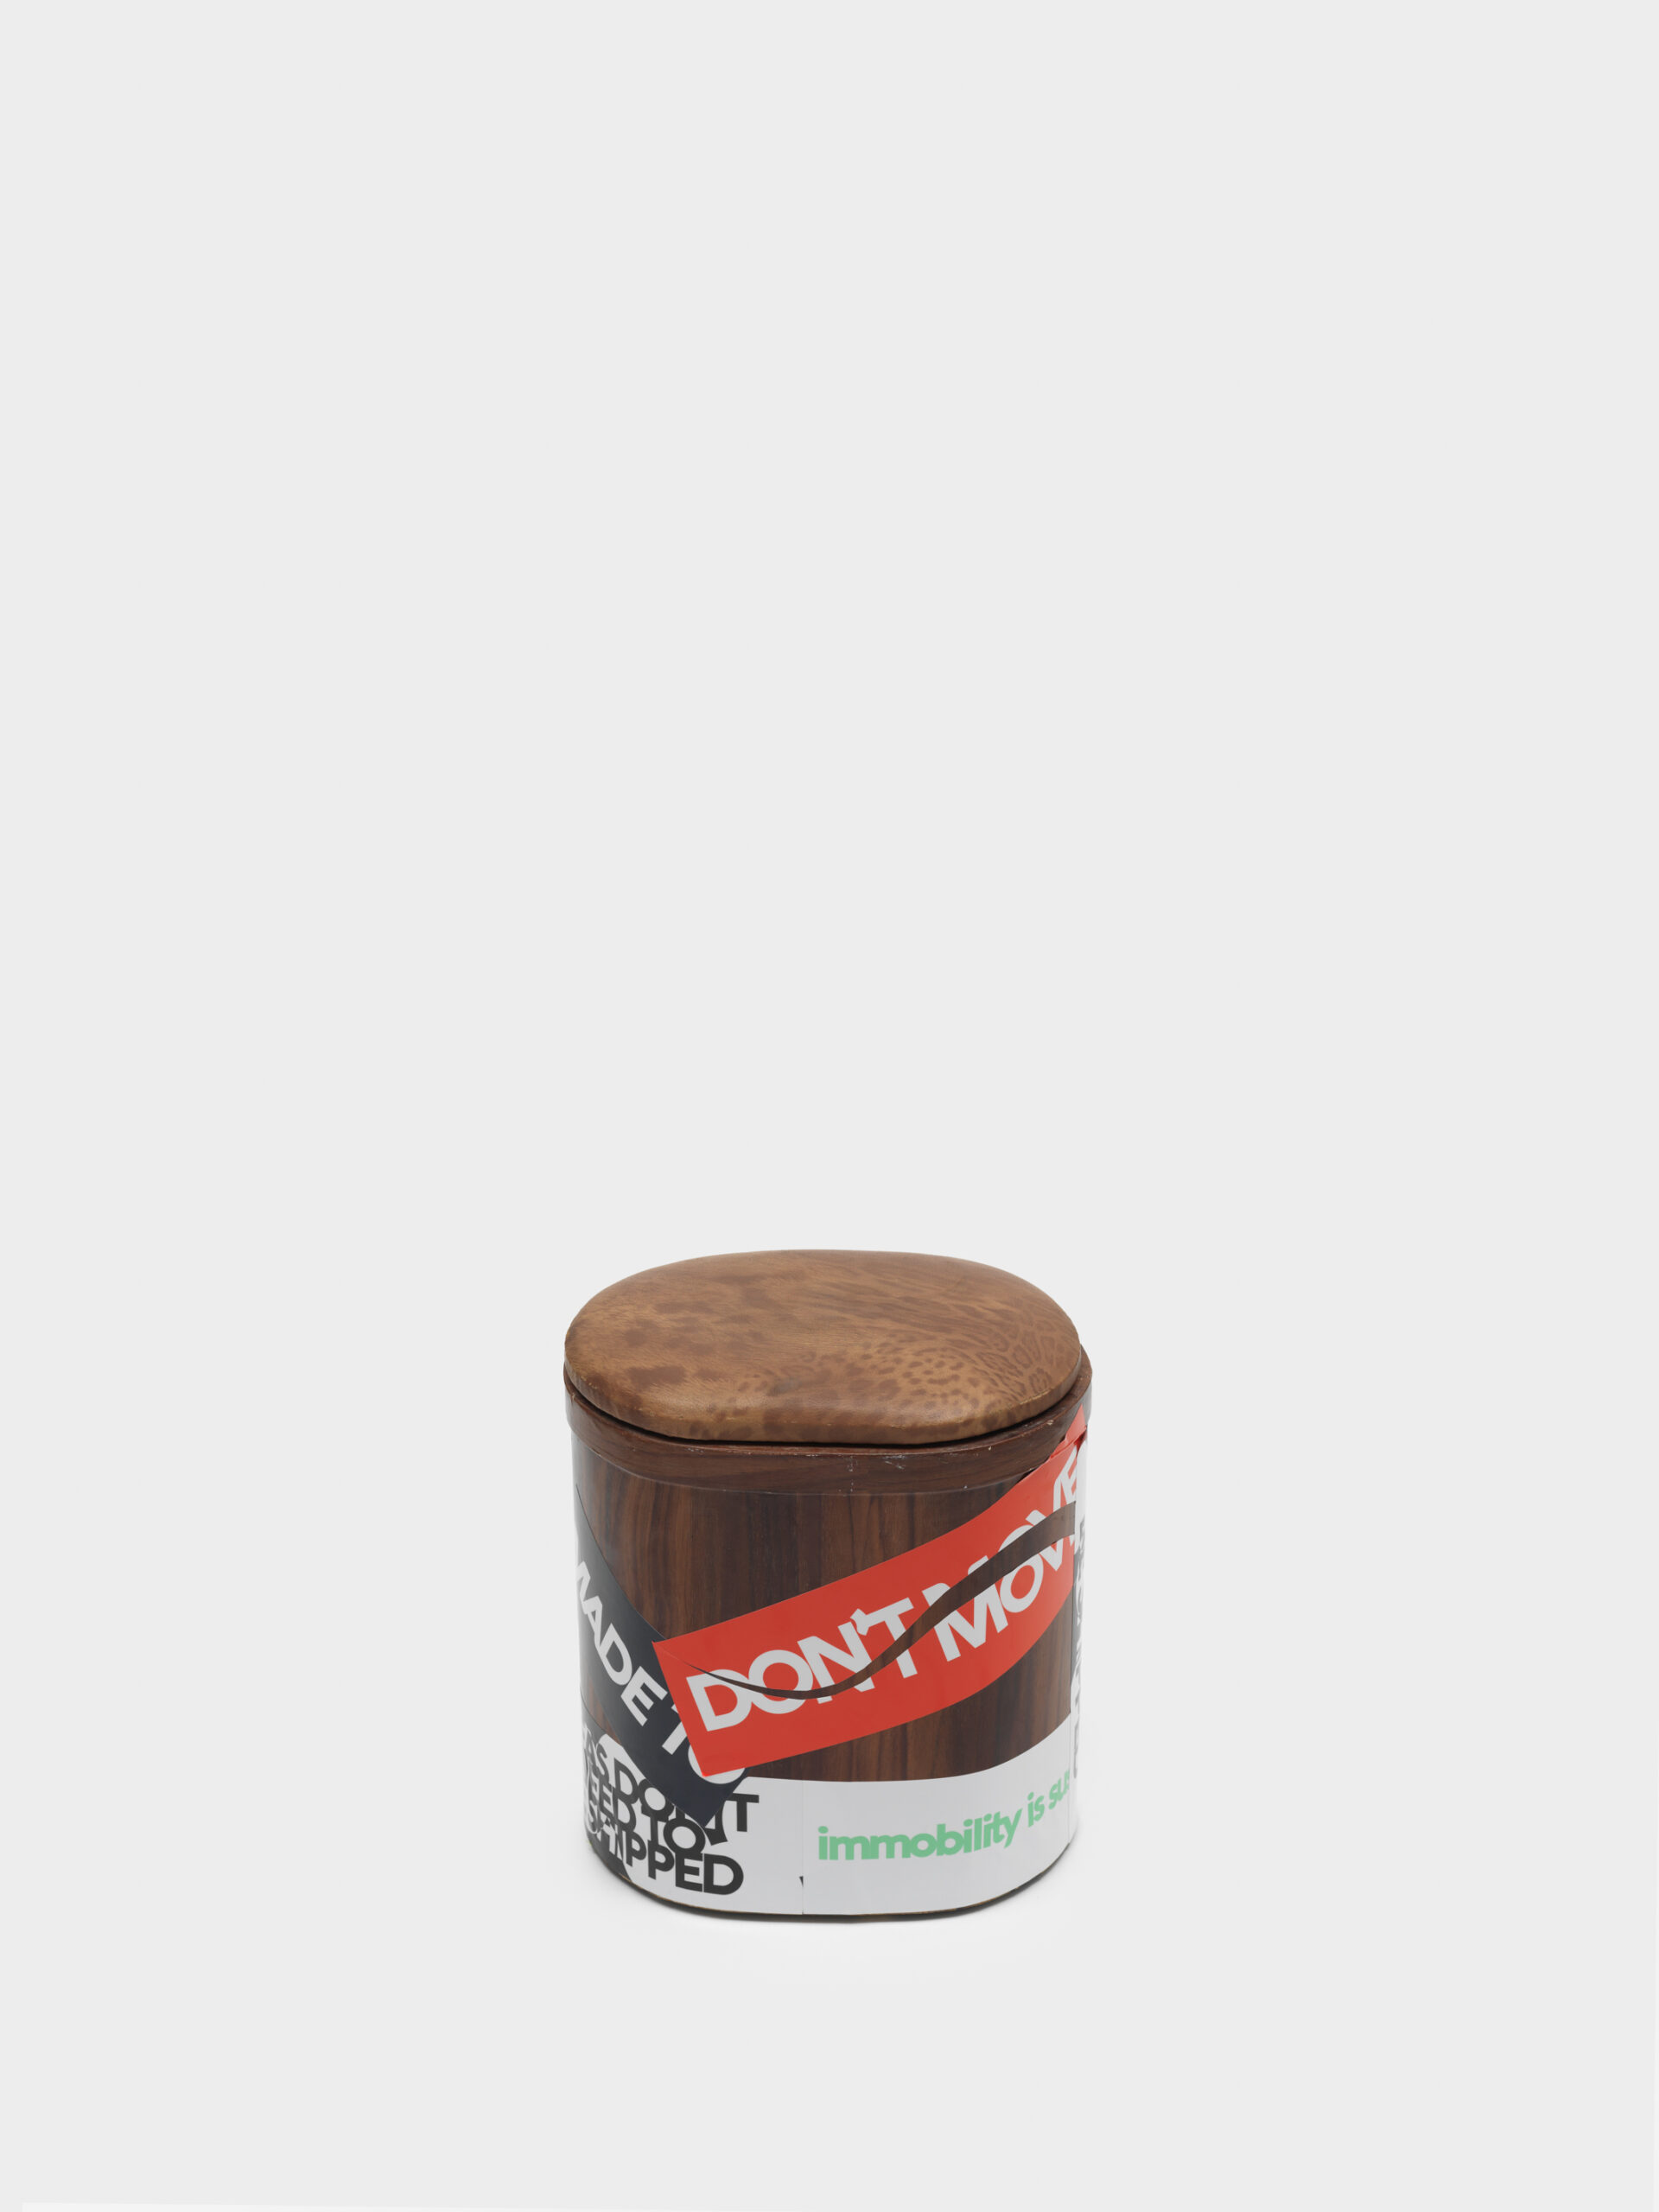 Product image: Wooden Stool, modified by Evi, claim stickers, 2022 Athens, 4.6 tons